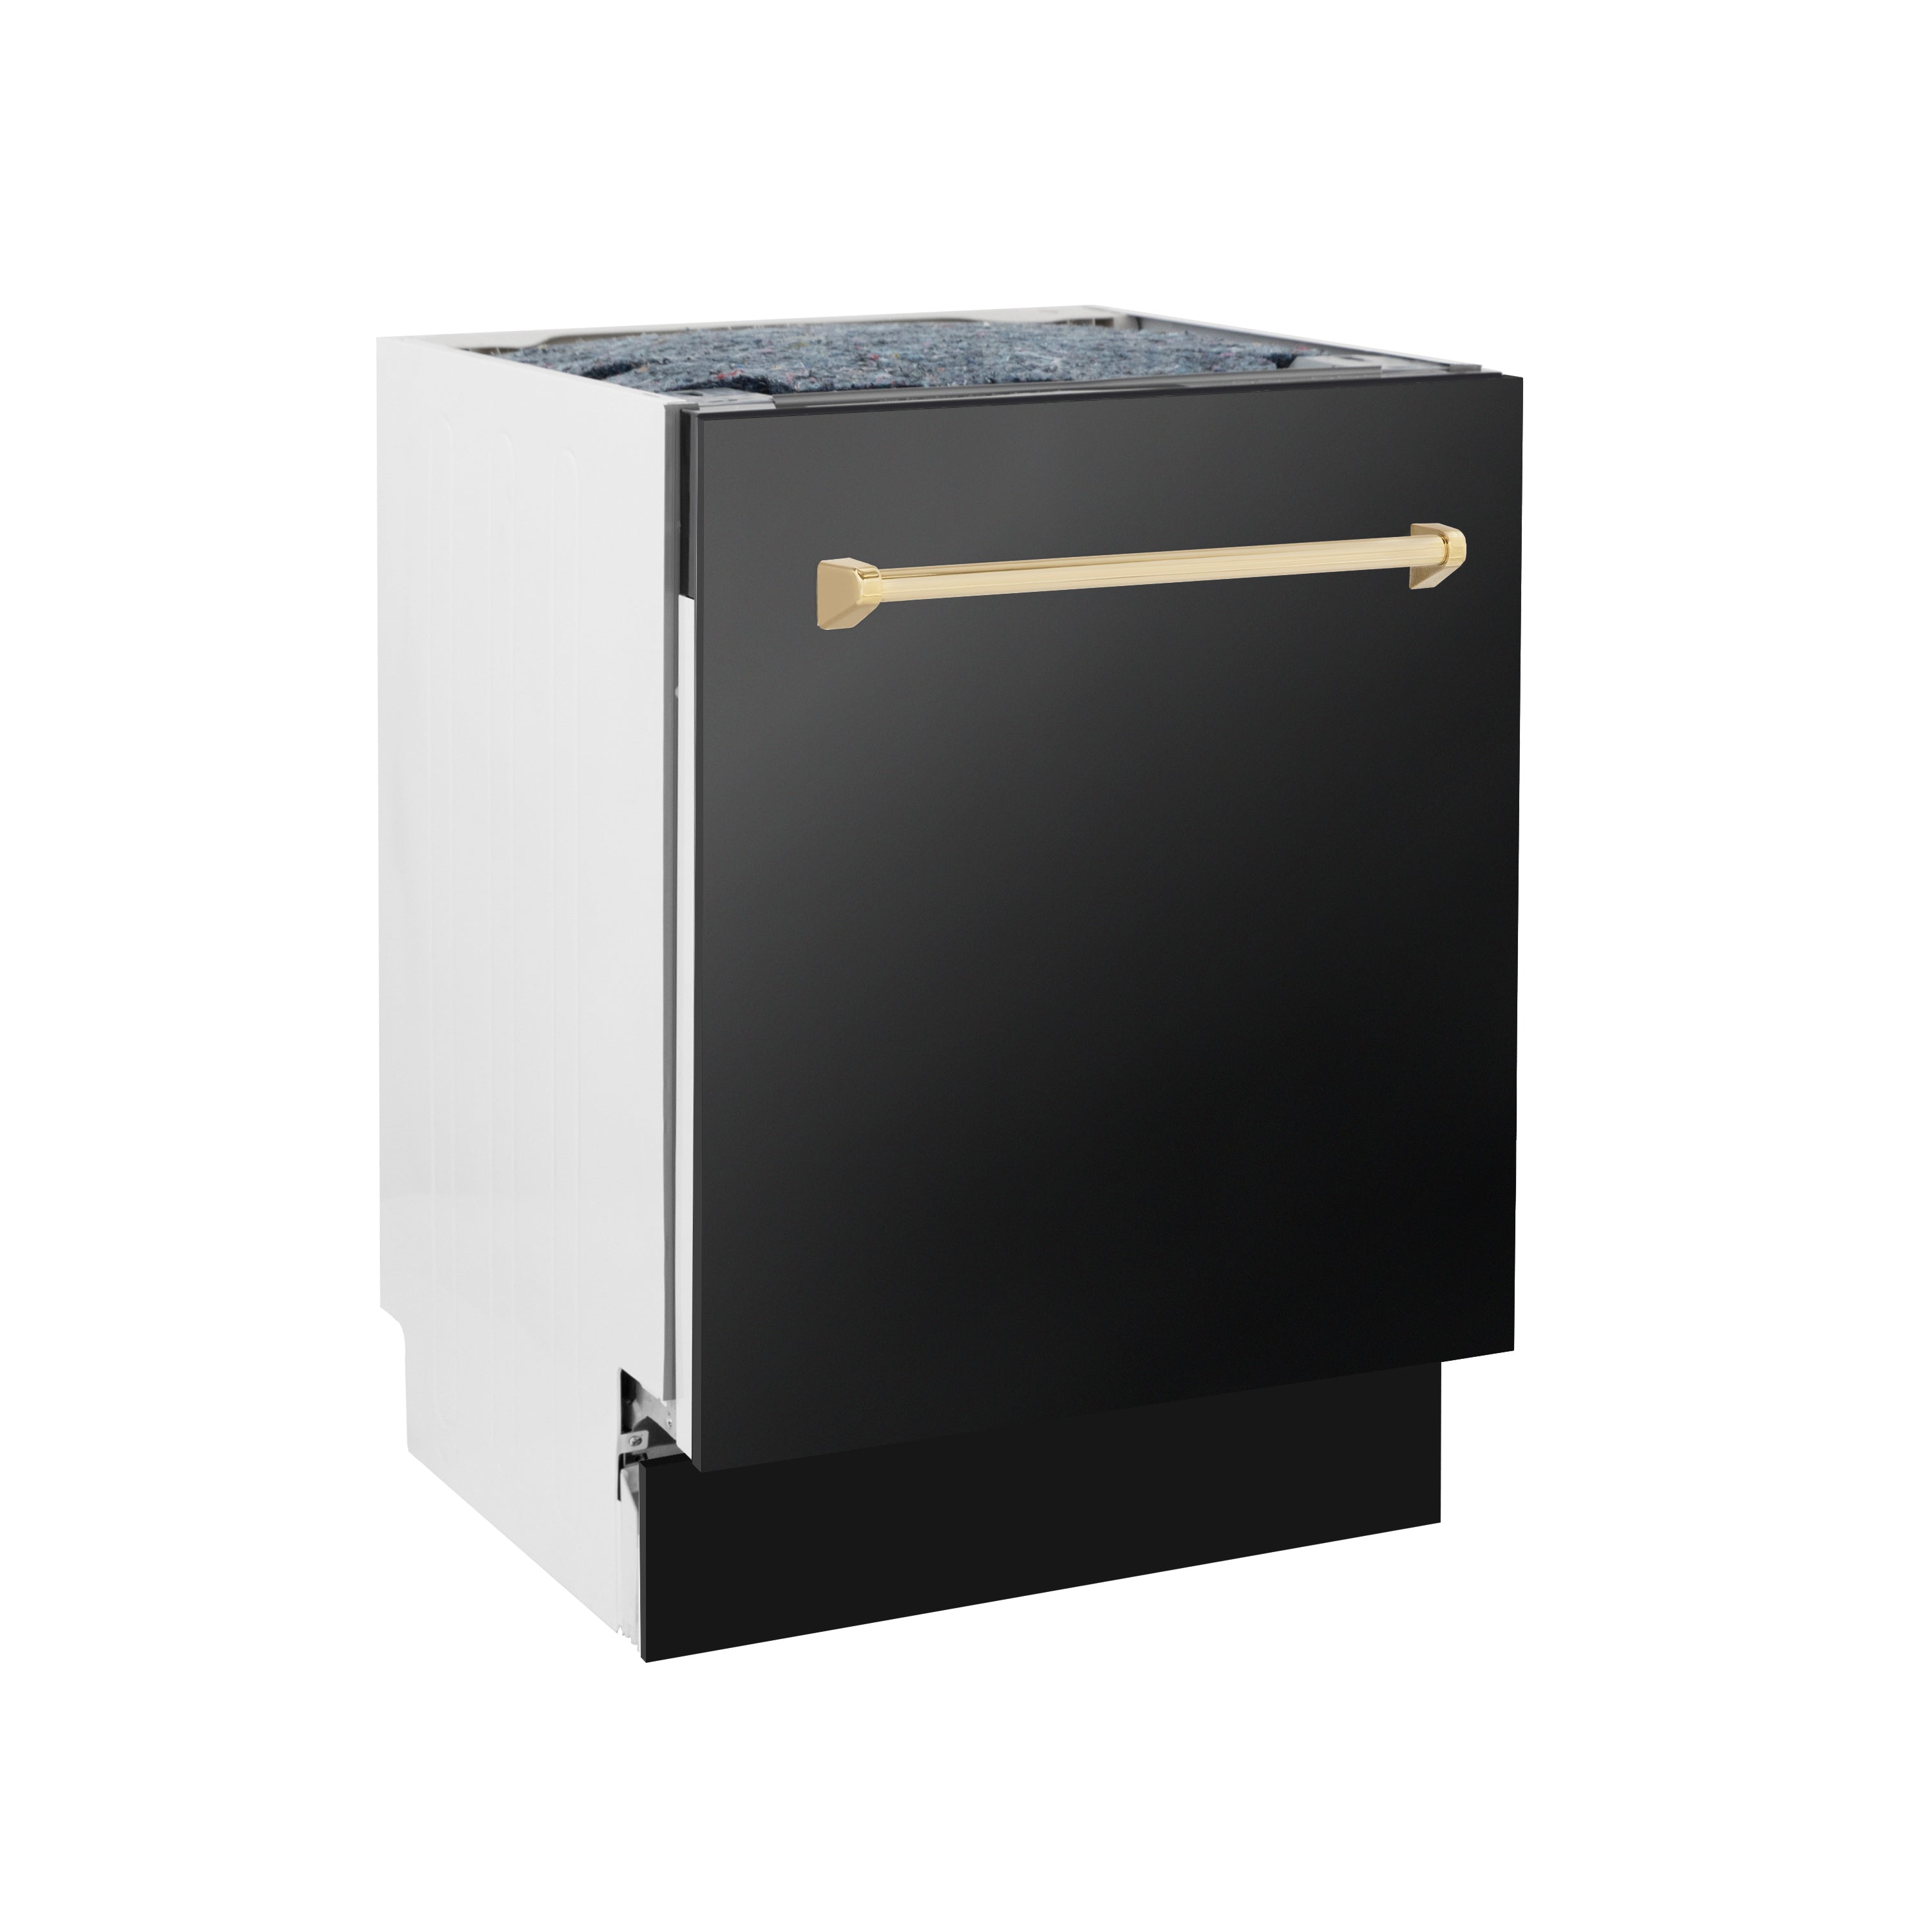 ZLINE Autograph Edition 24 in. 3rd Rack Top Control Tall Tub Dishwasher in Black Stainless Steel with Gold Accent Handle, 51dBa (DWVZ-BS-24-G) Side View